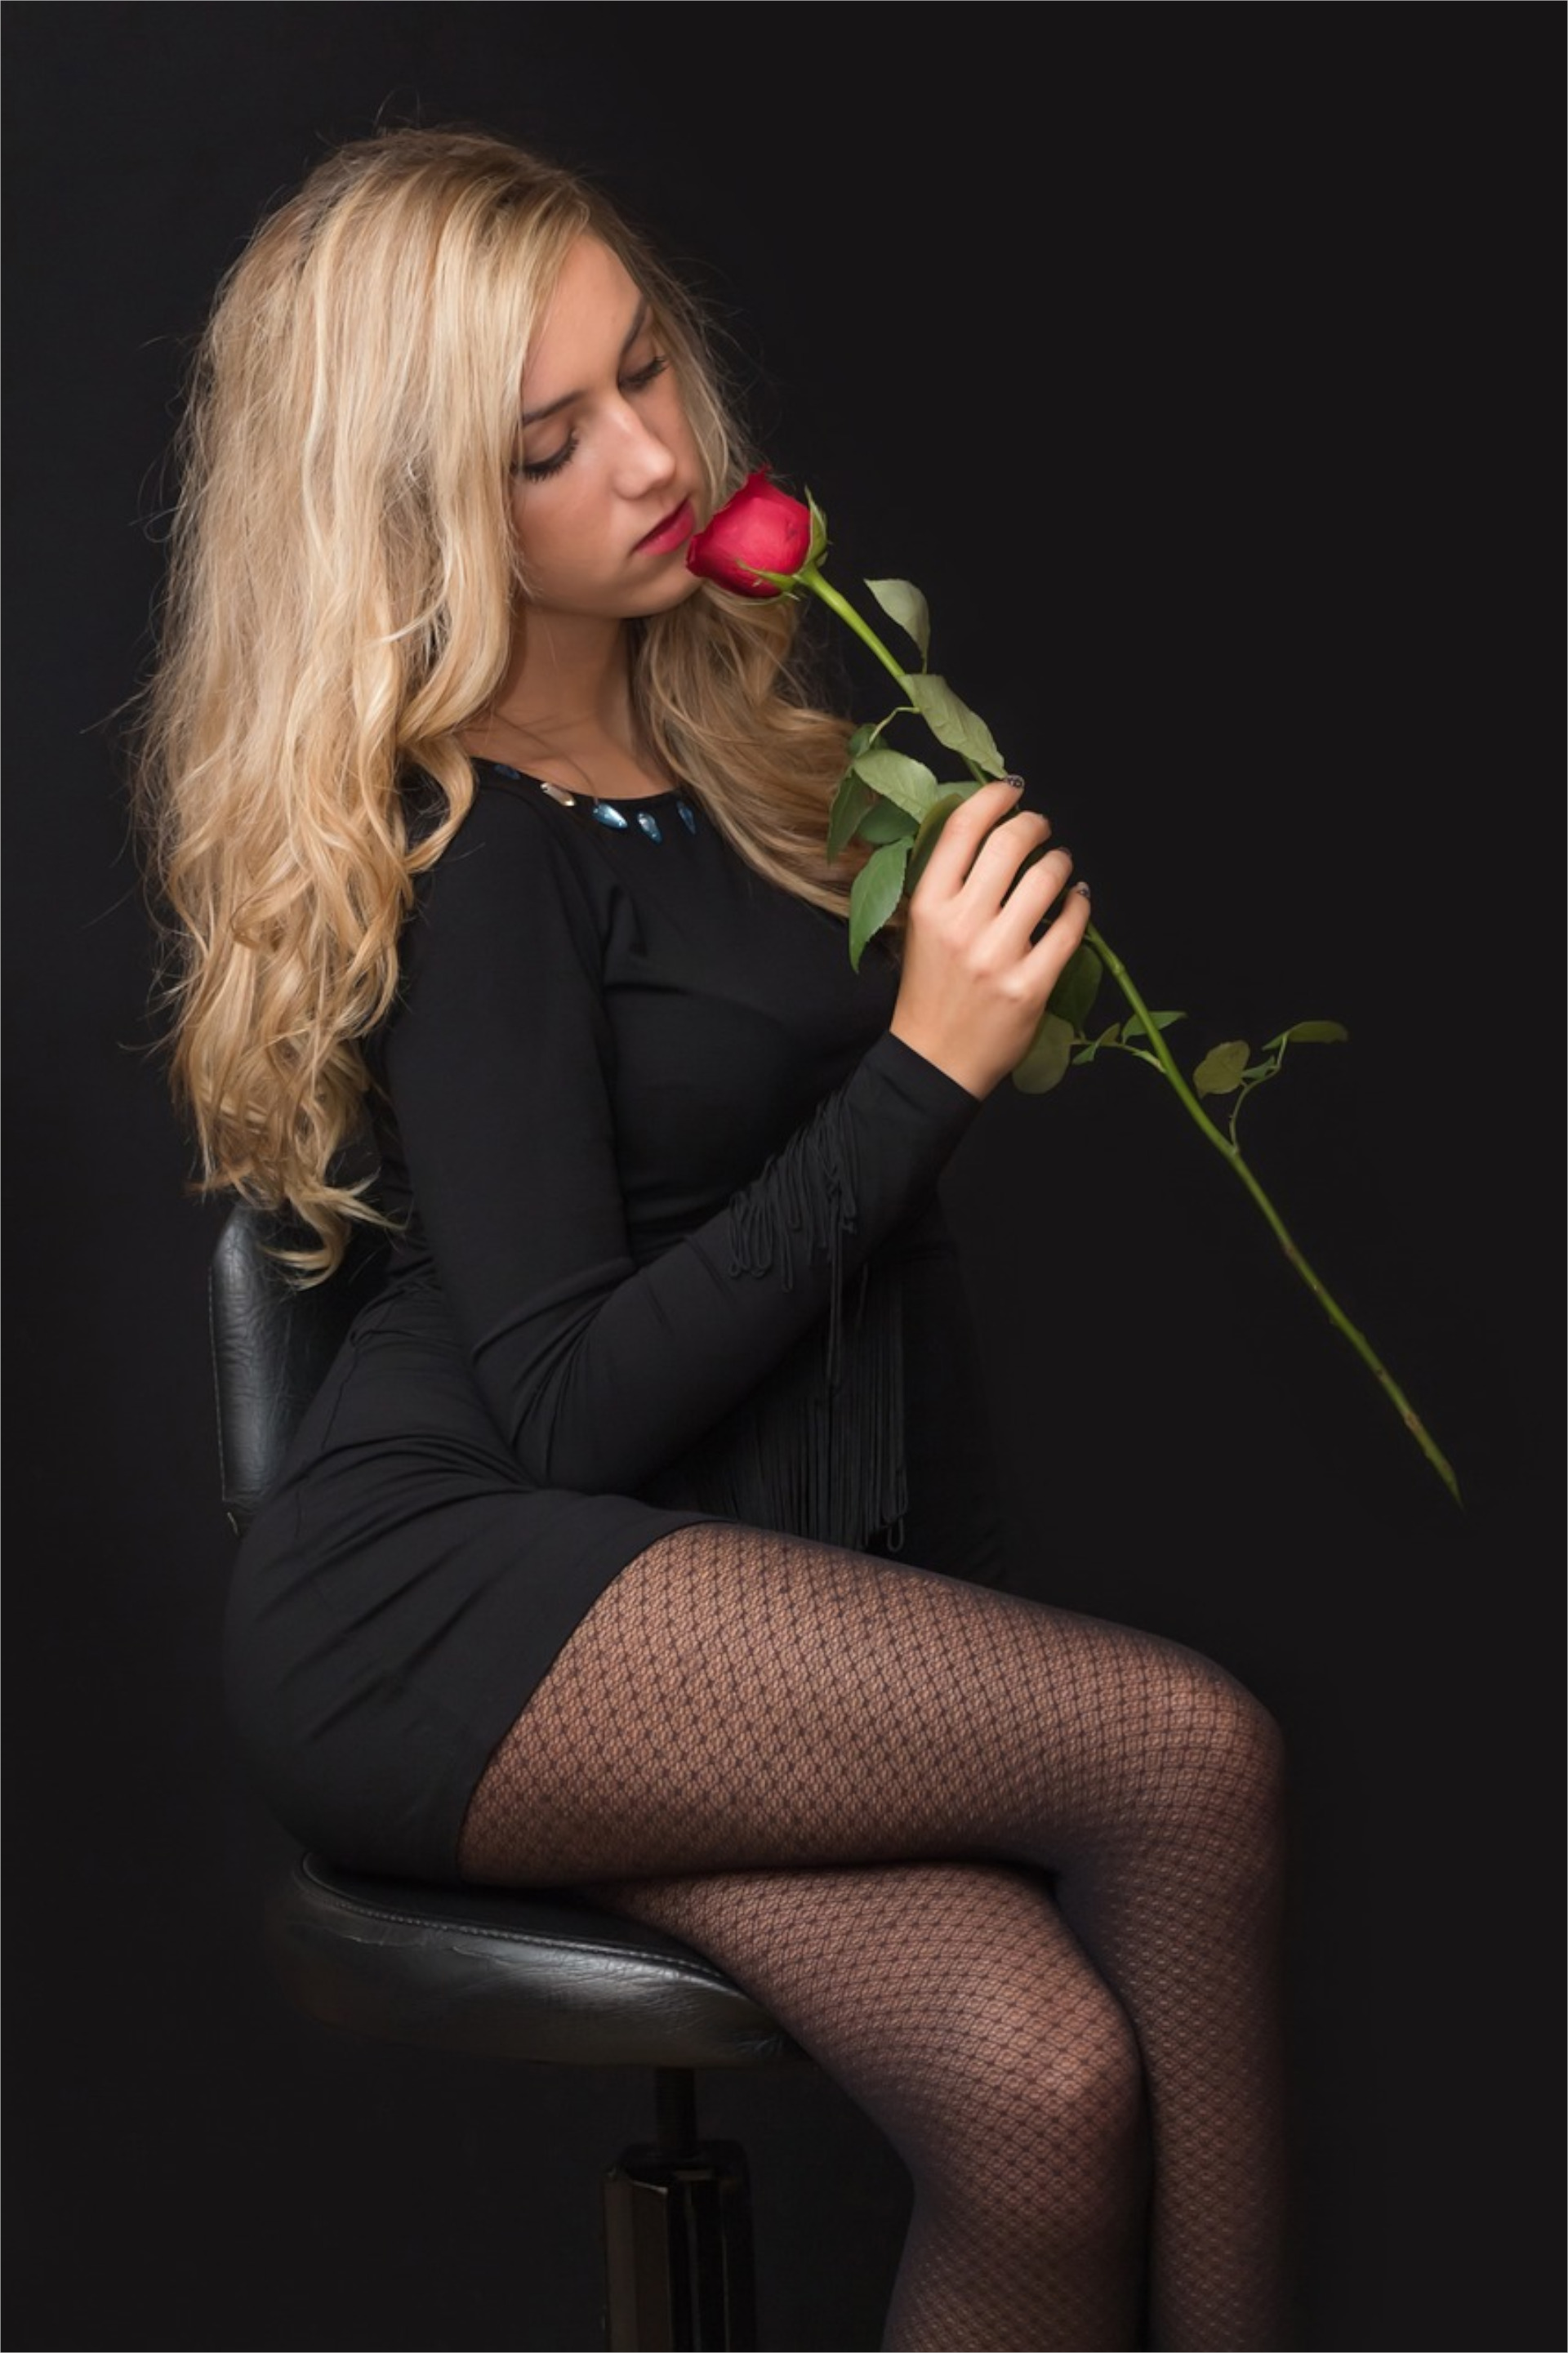 Blonde in a black evening dress with a red rose